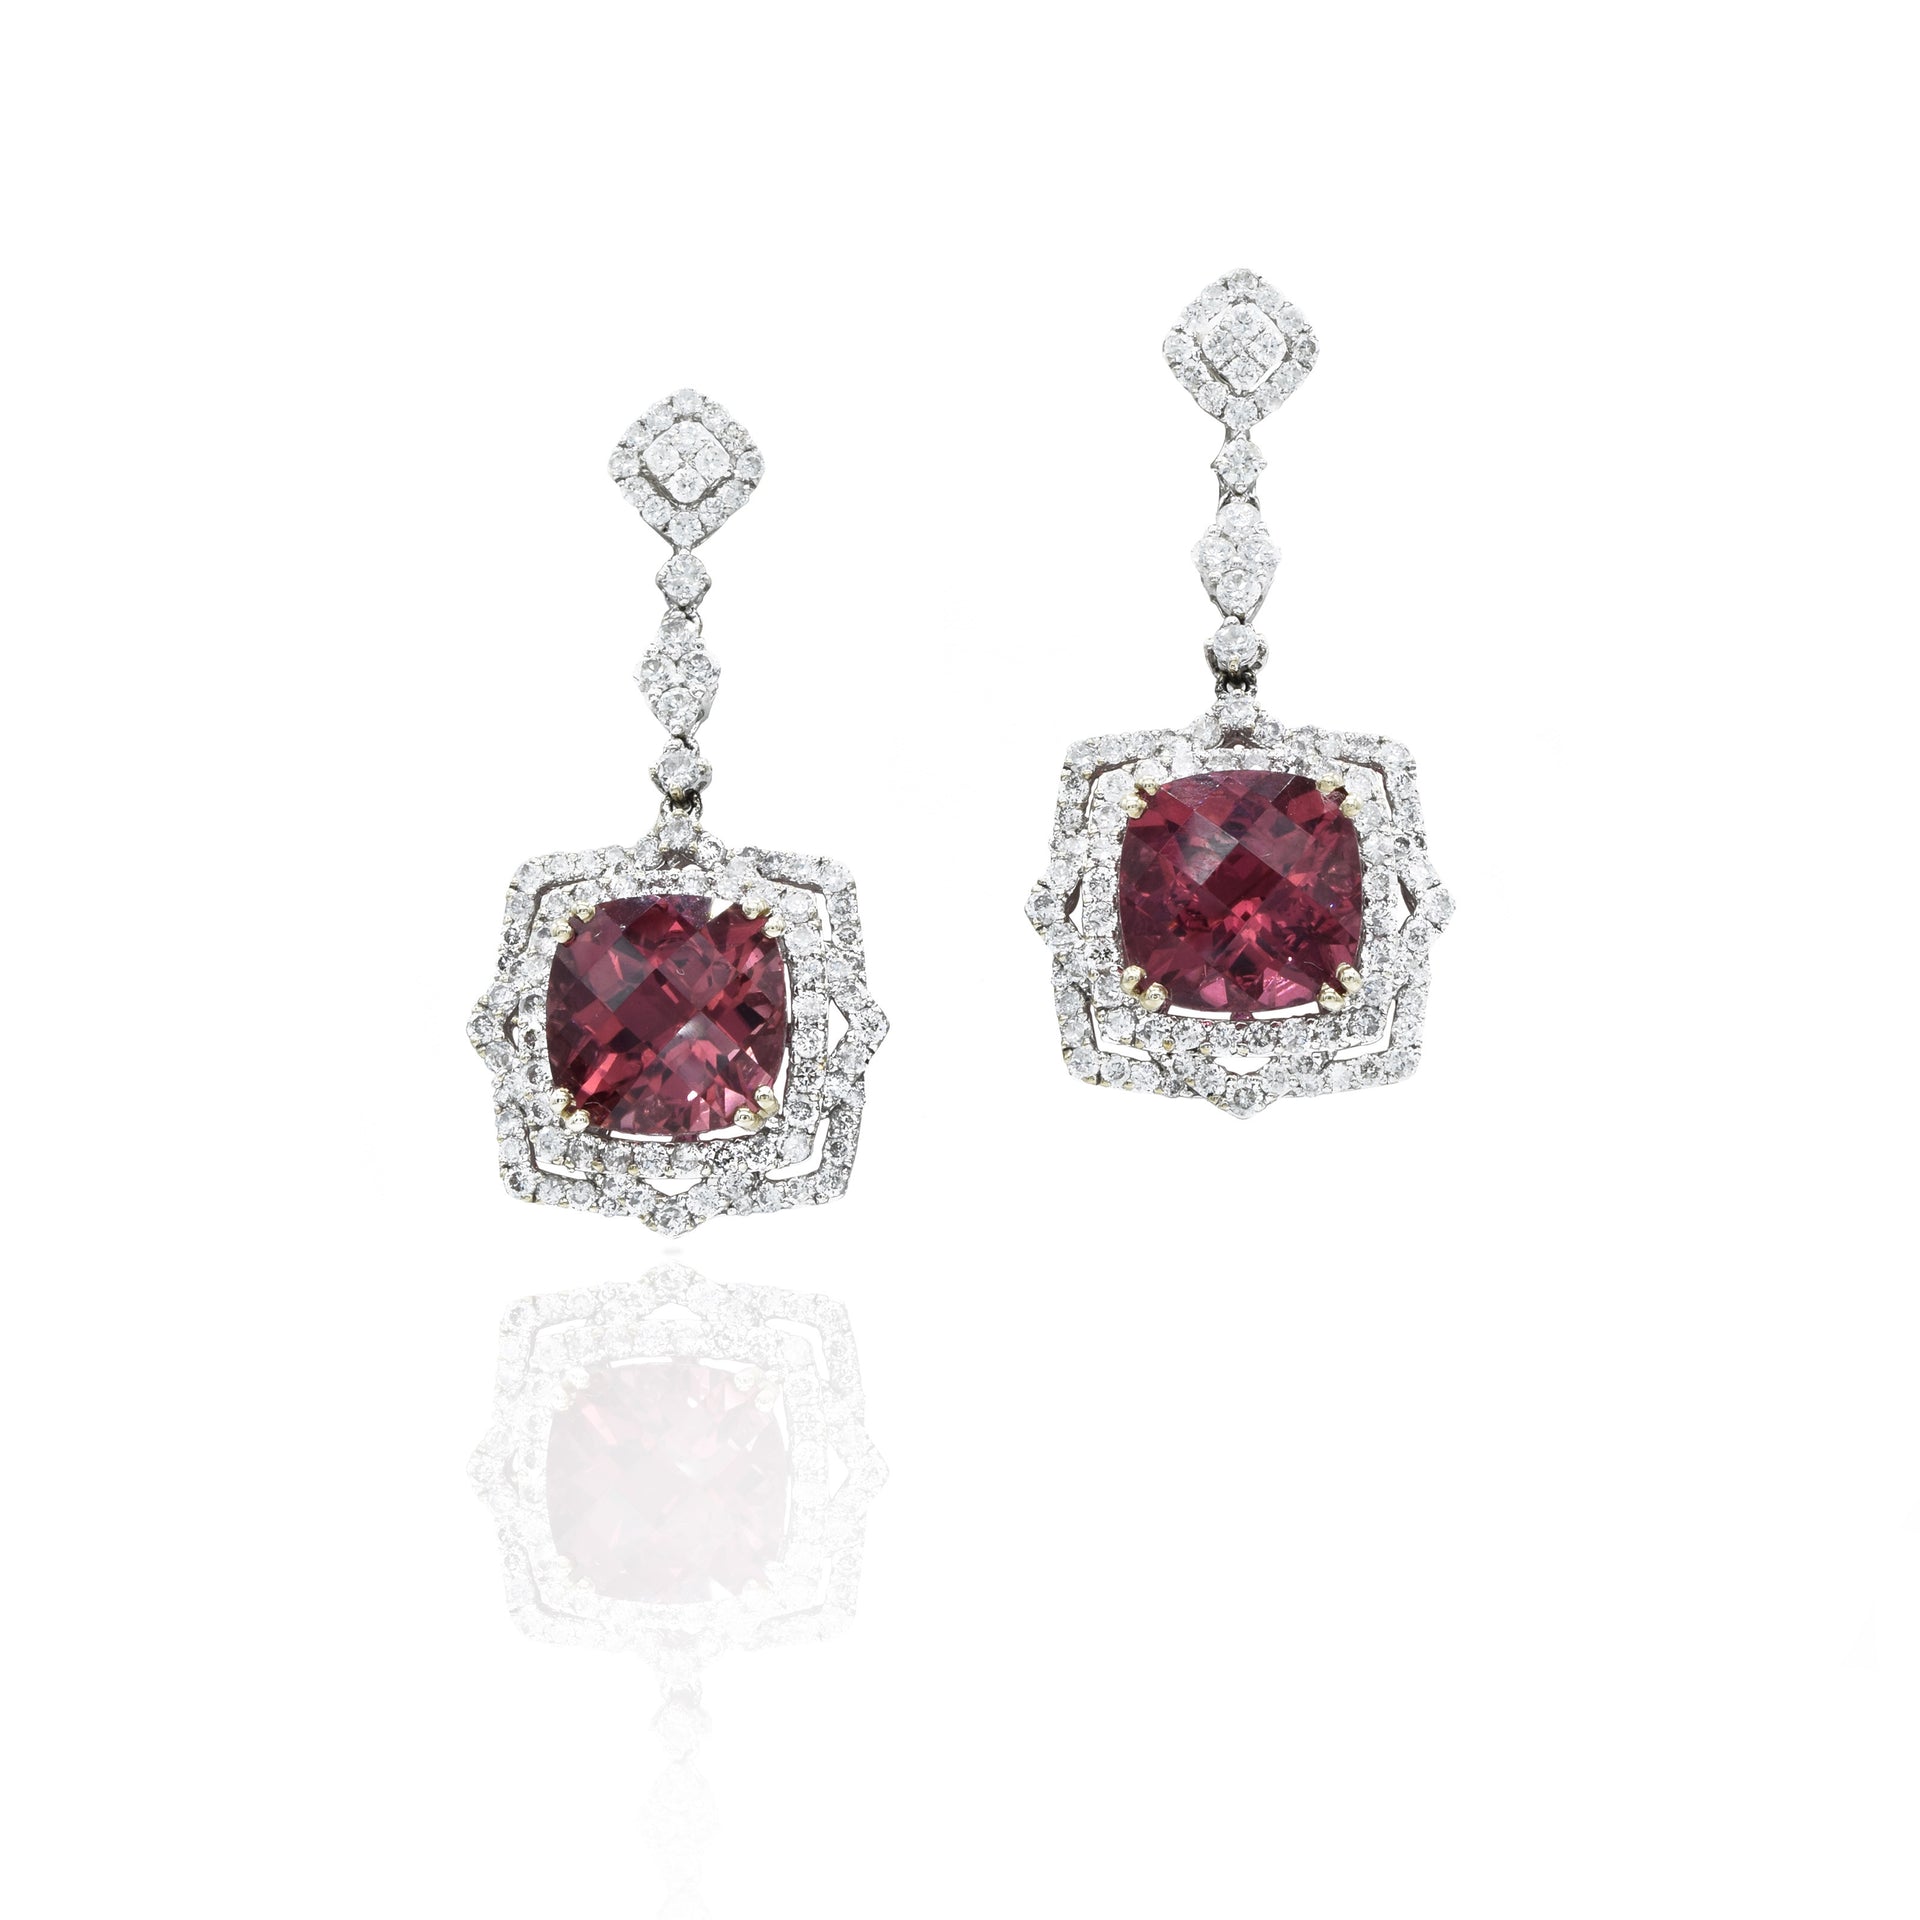 18KT White Gold Diamond And Pink Tourmaline Drop Earrings